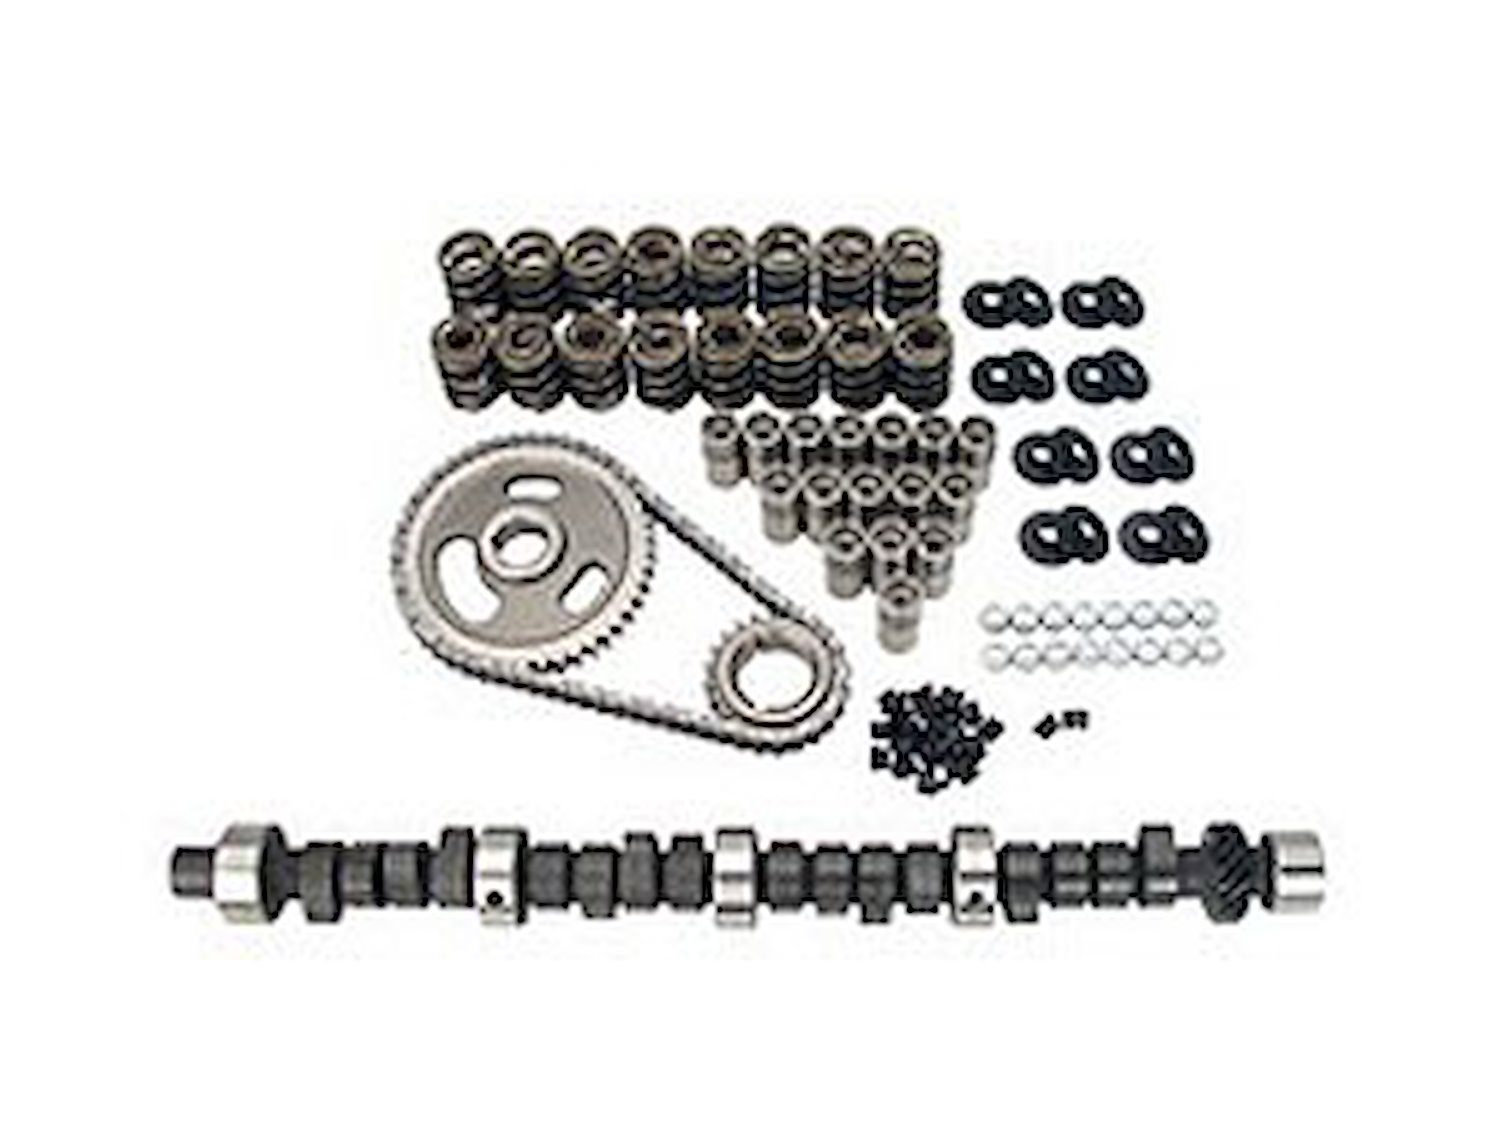 Xtreme Energy 294H Hydraulic Flat Tappet Camshaft Complete Kit Lift .519"/.524" Duration 294°/306° RPM Range 3000-7000